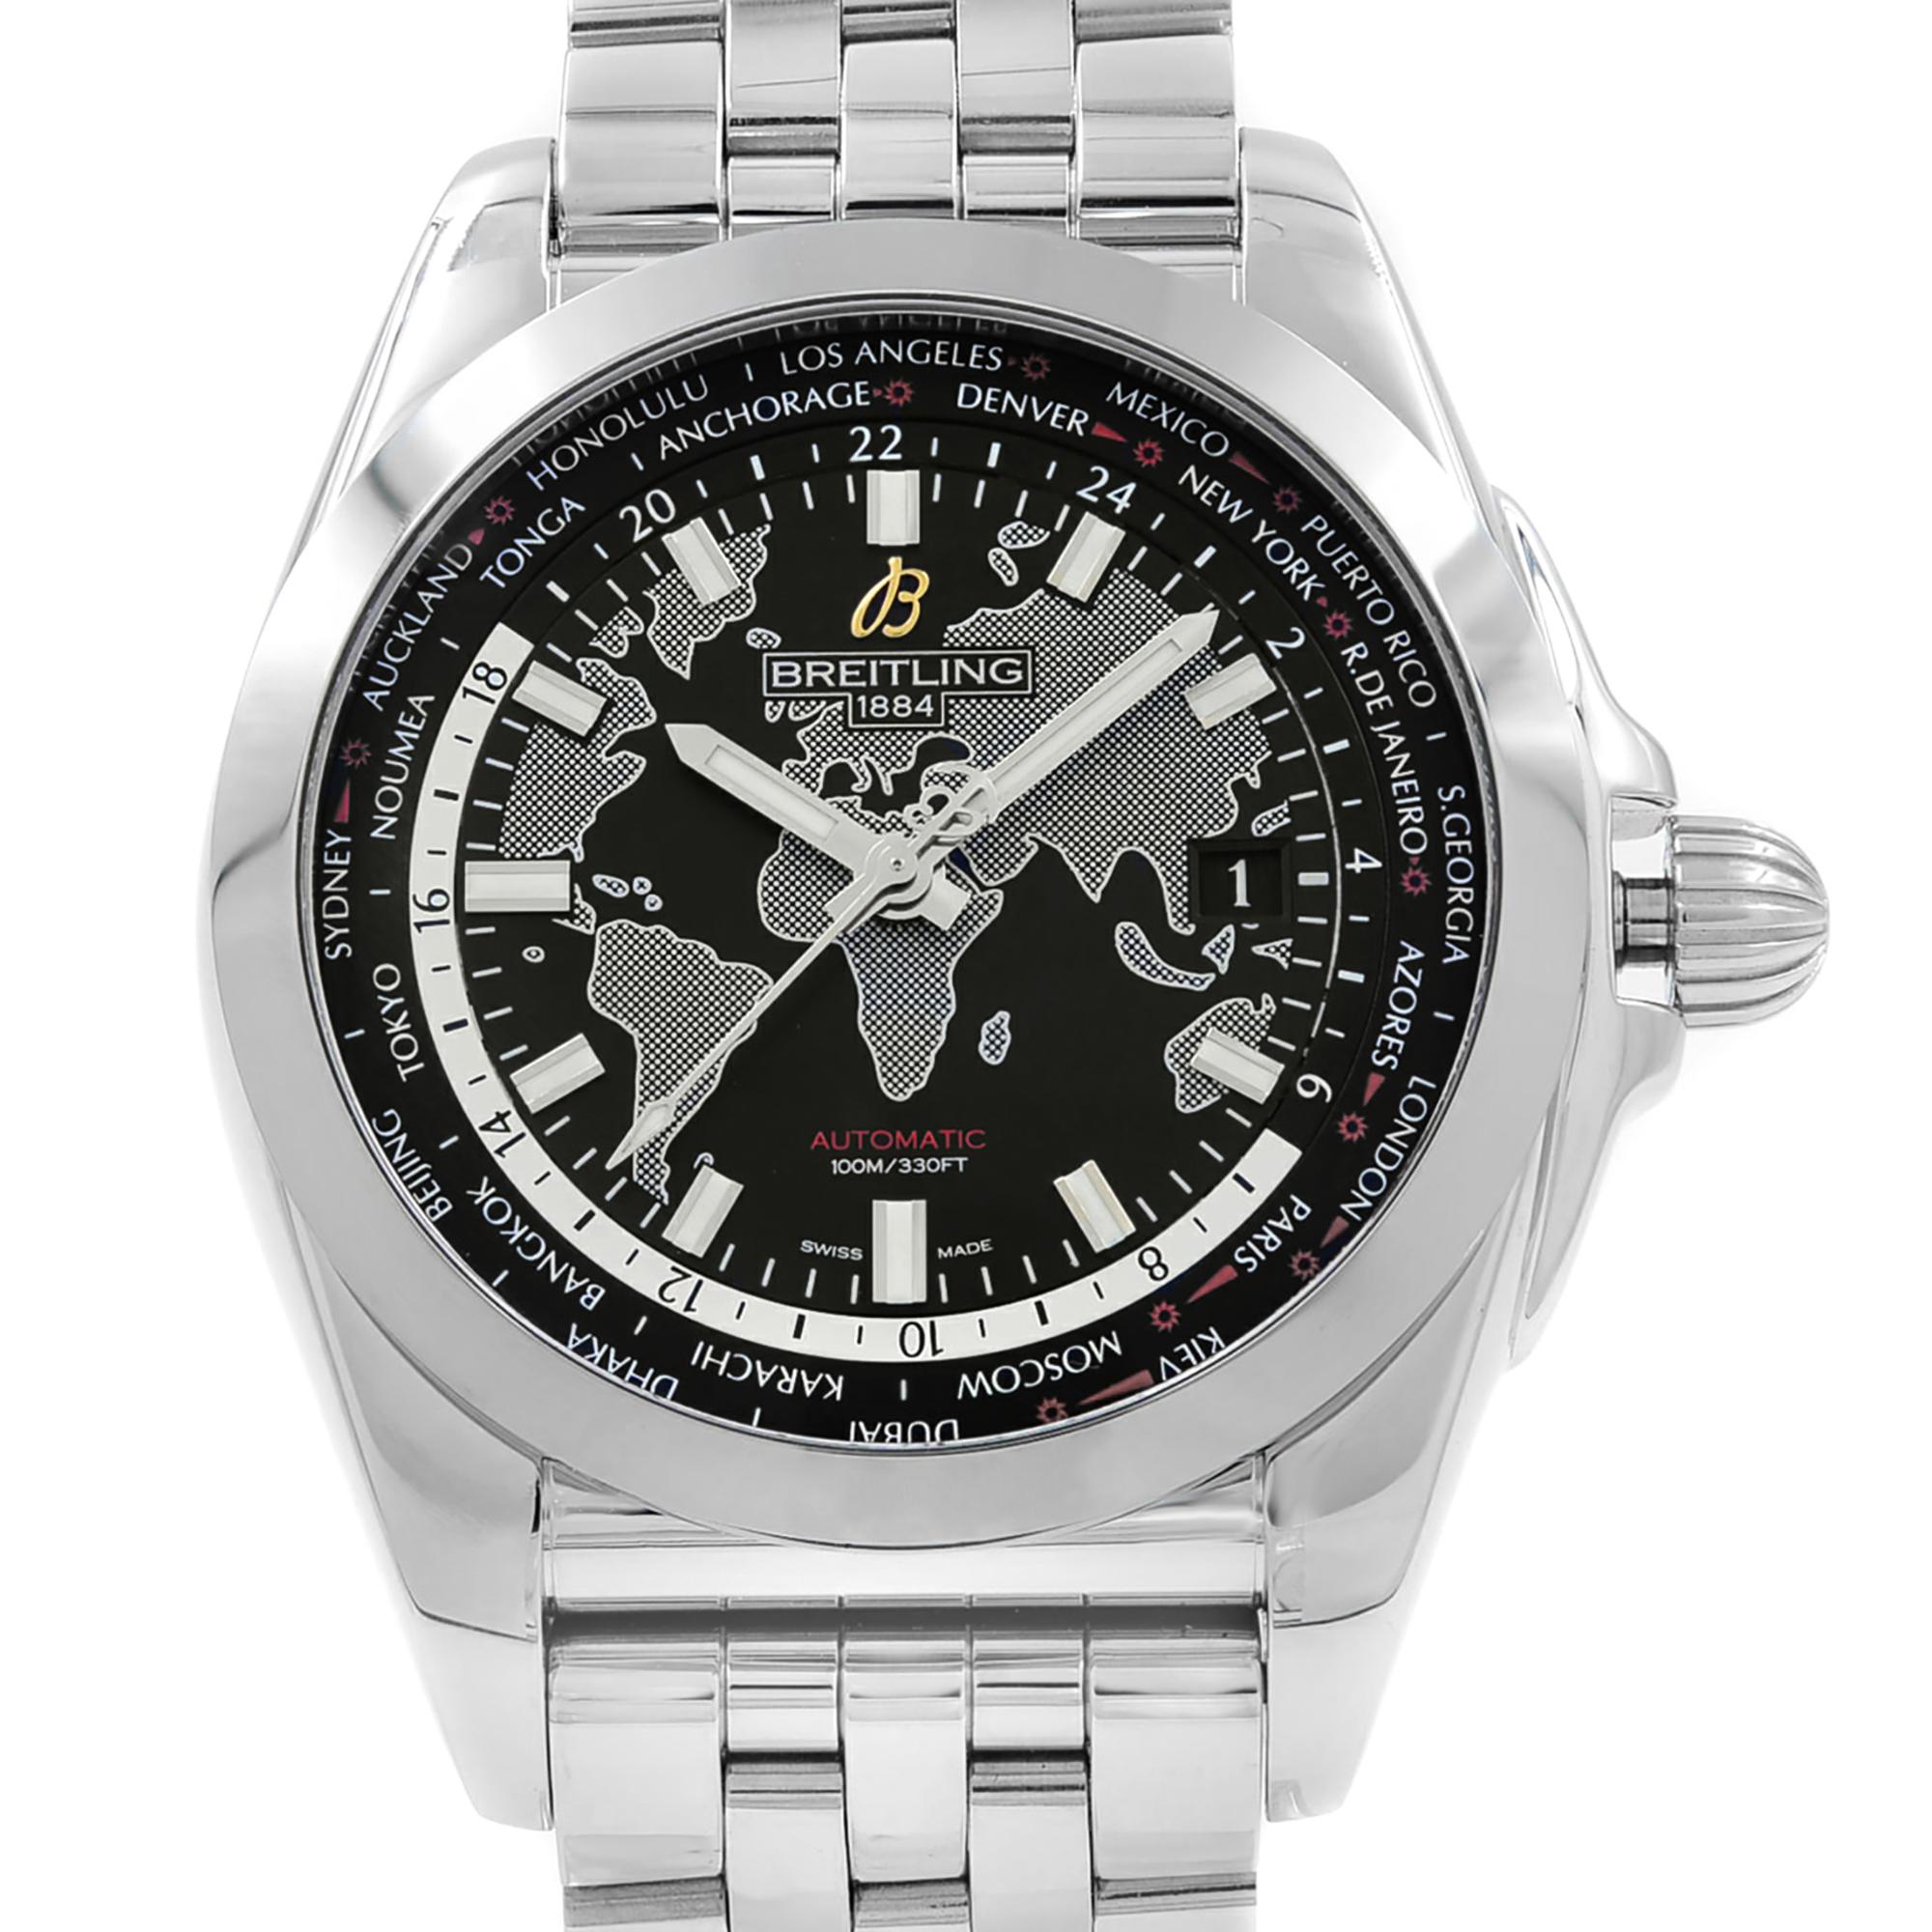 This display model Breitling Galactic  WB3510U4/BD94-375A is a beautiful men's timepiece that is powered by an automatic movement which is cased in a stainless steel case. It has a round shape face, date dial and has hand sticks style markers. It is